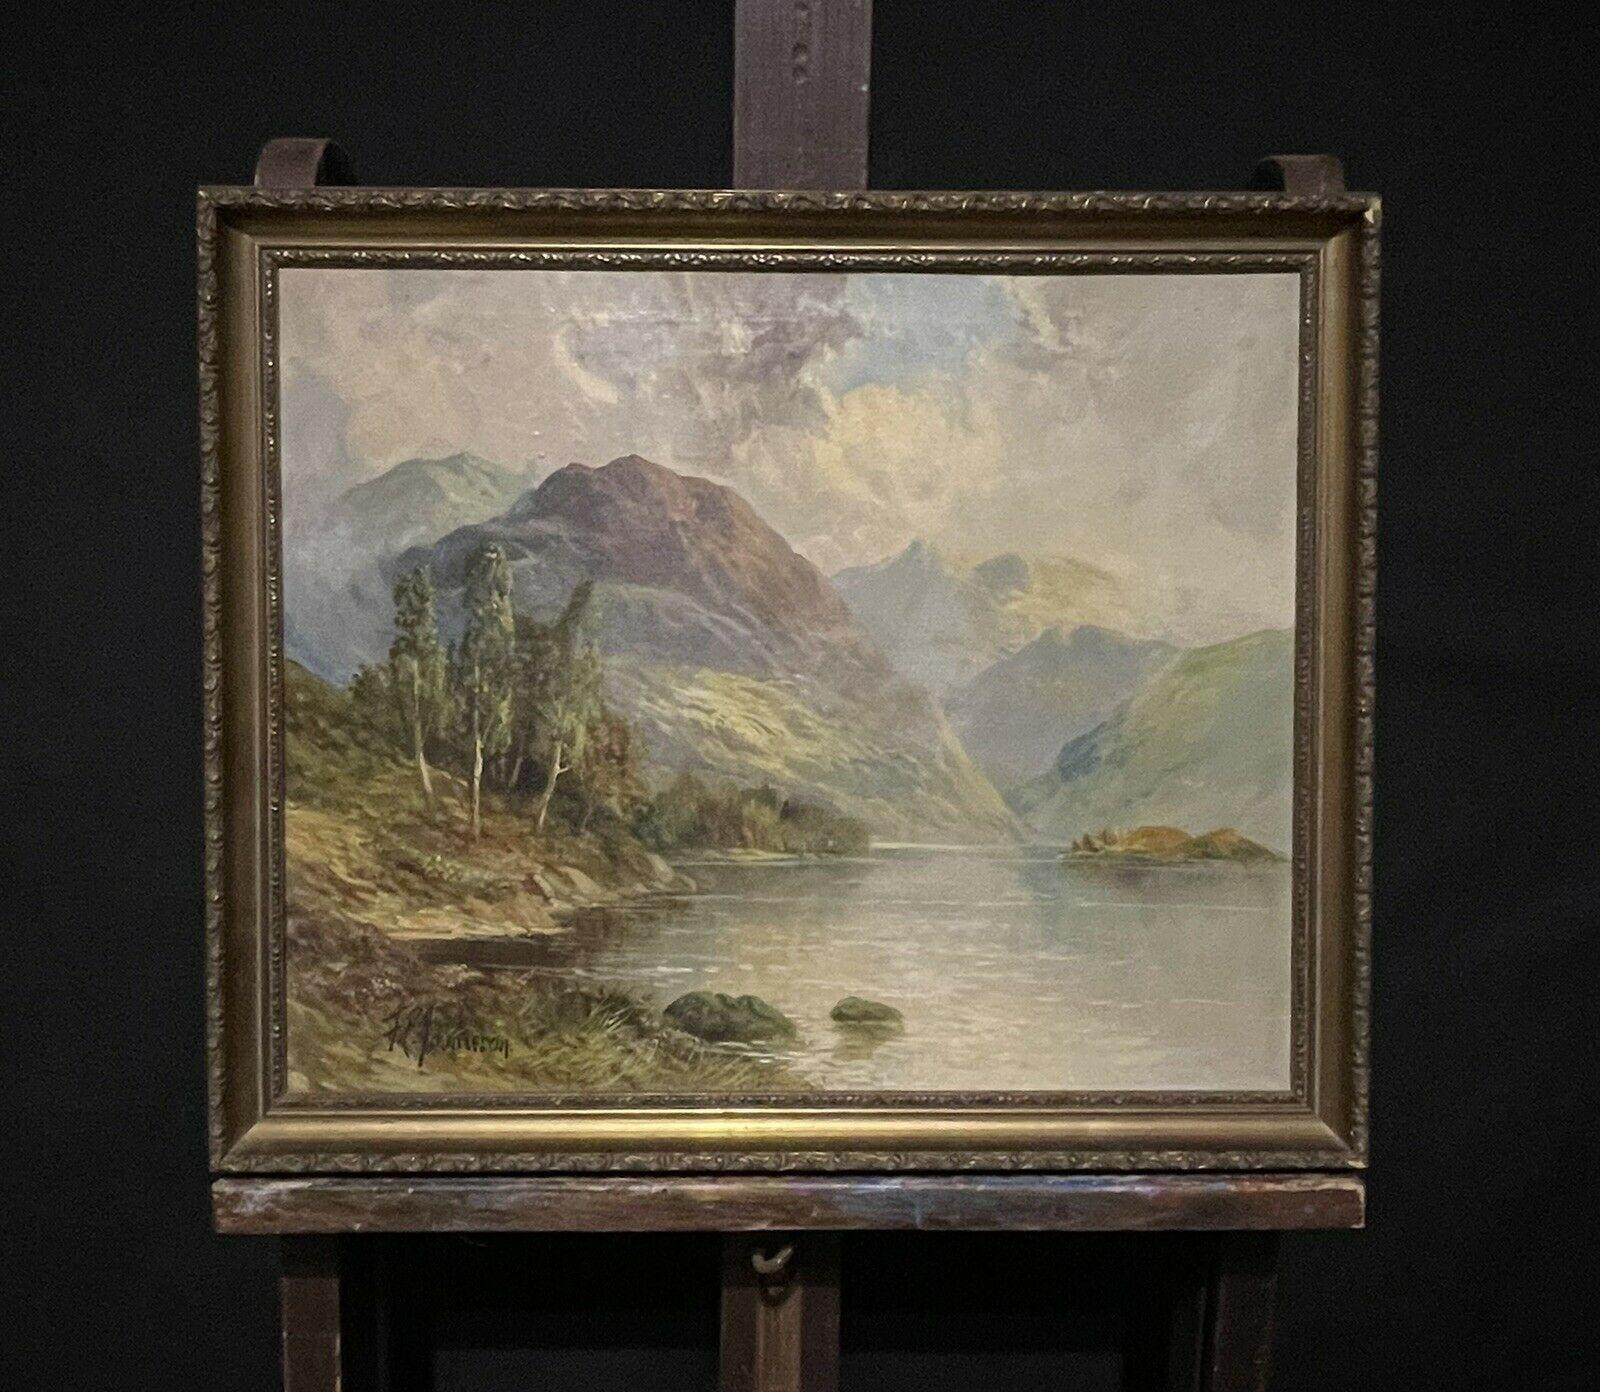 Loch Katrine Scottish Highlands Summer Landscape, antique signed oil painting - Painting by Francis E. Jamieson